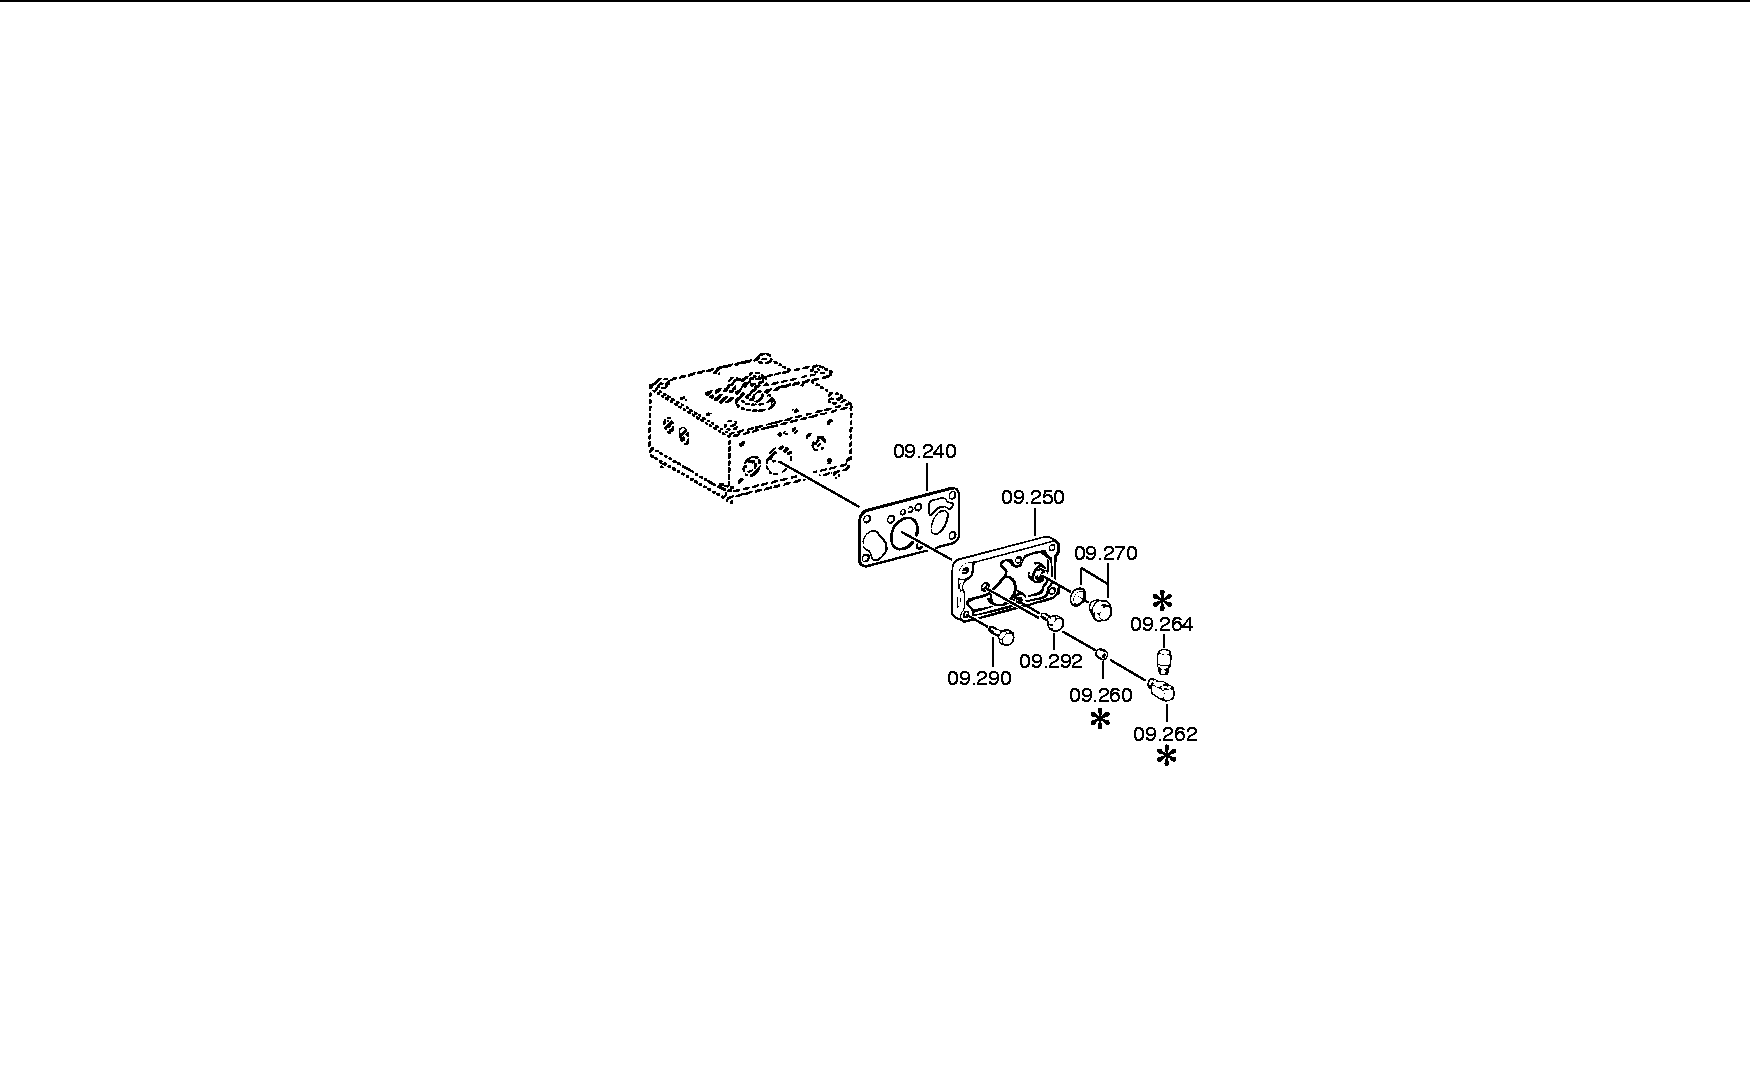 drawing for AGCO 020772R1 - SCREW PLUG (figure 2)